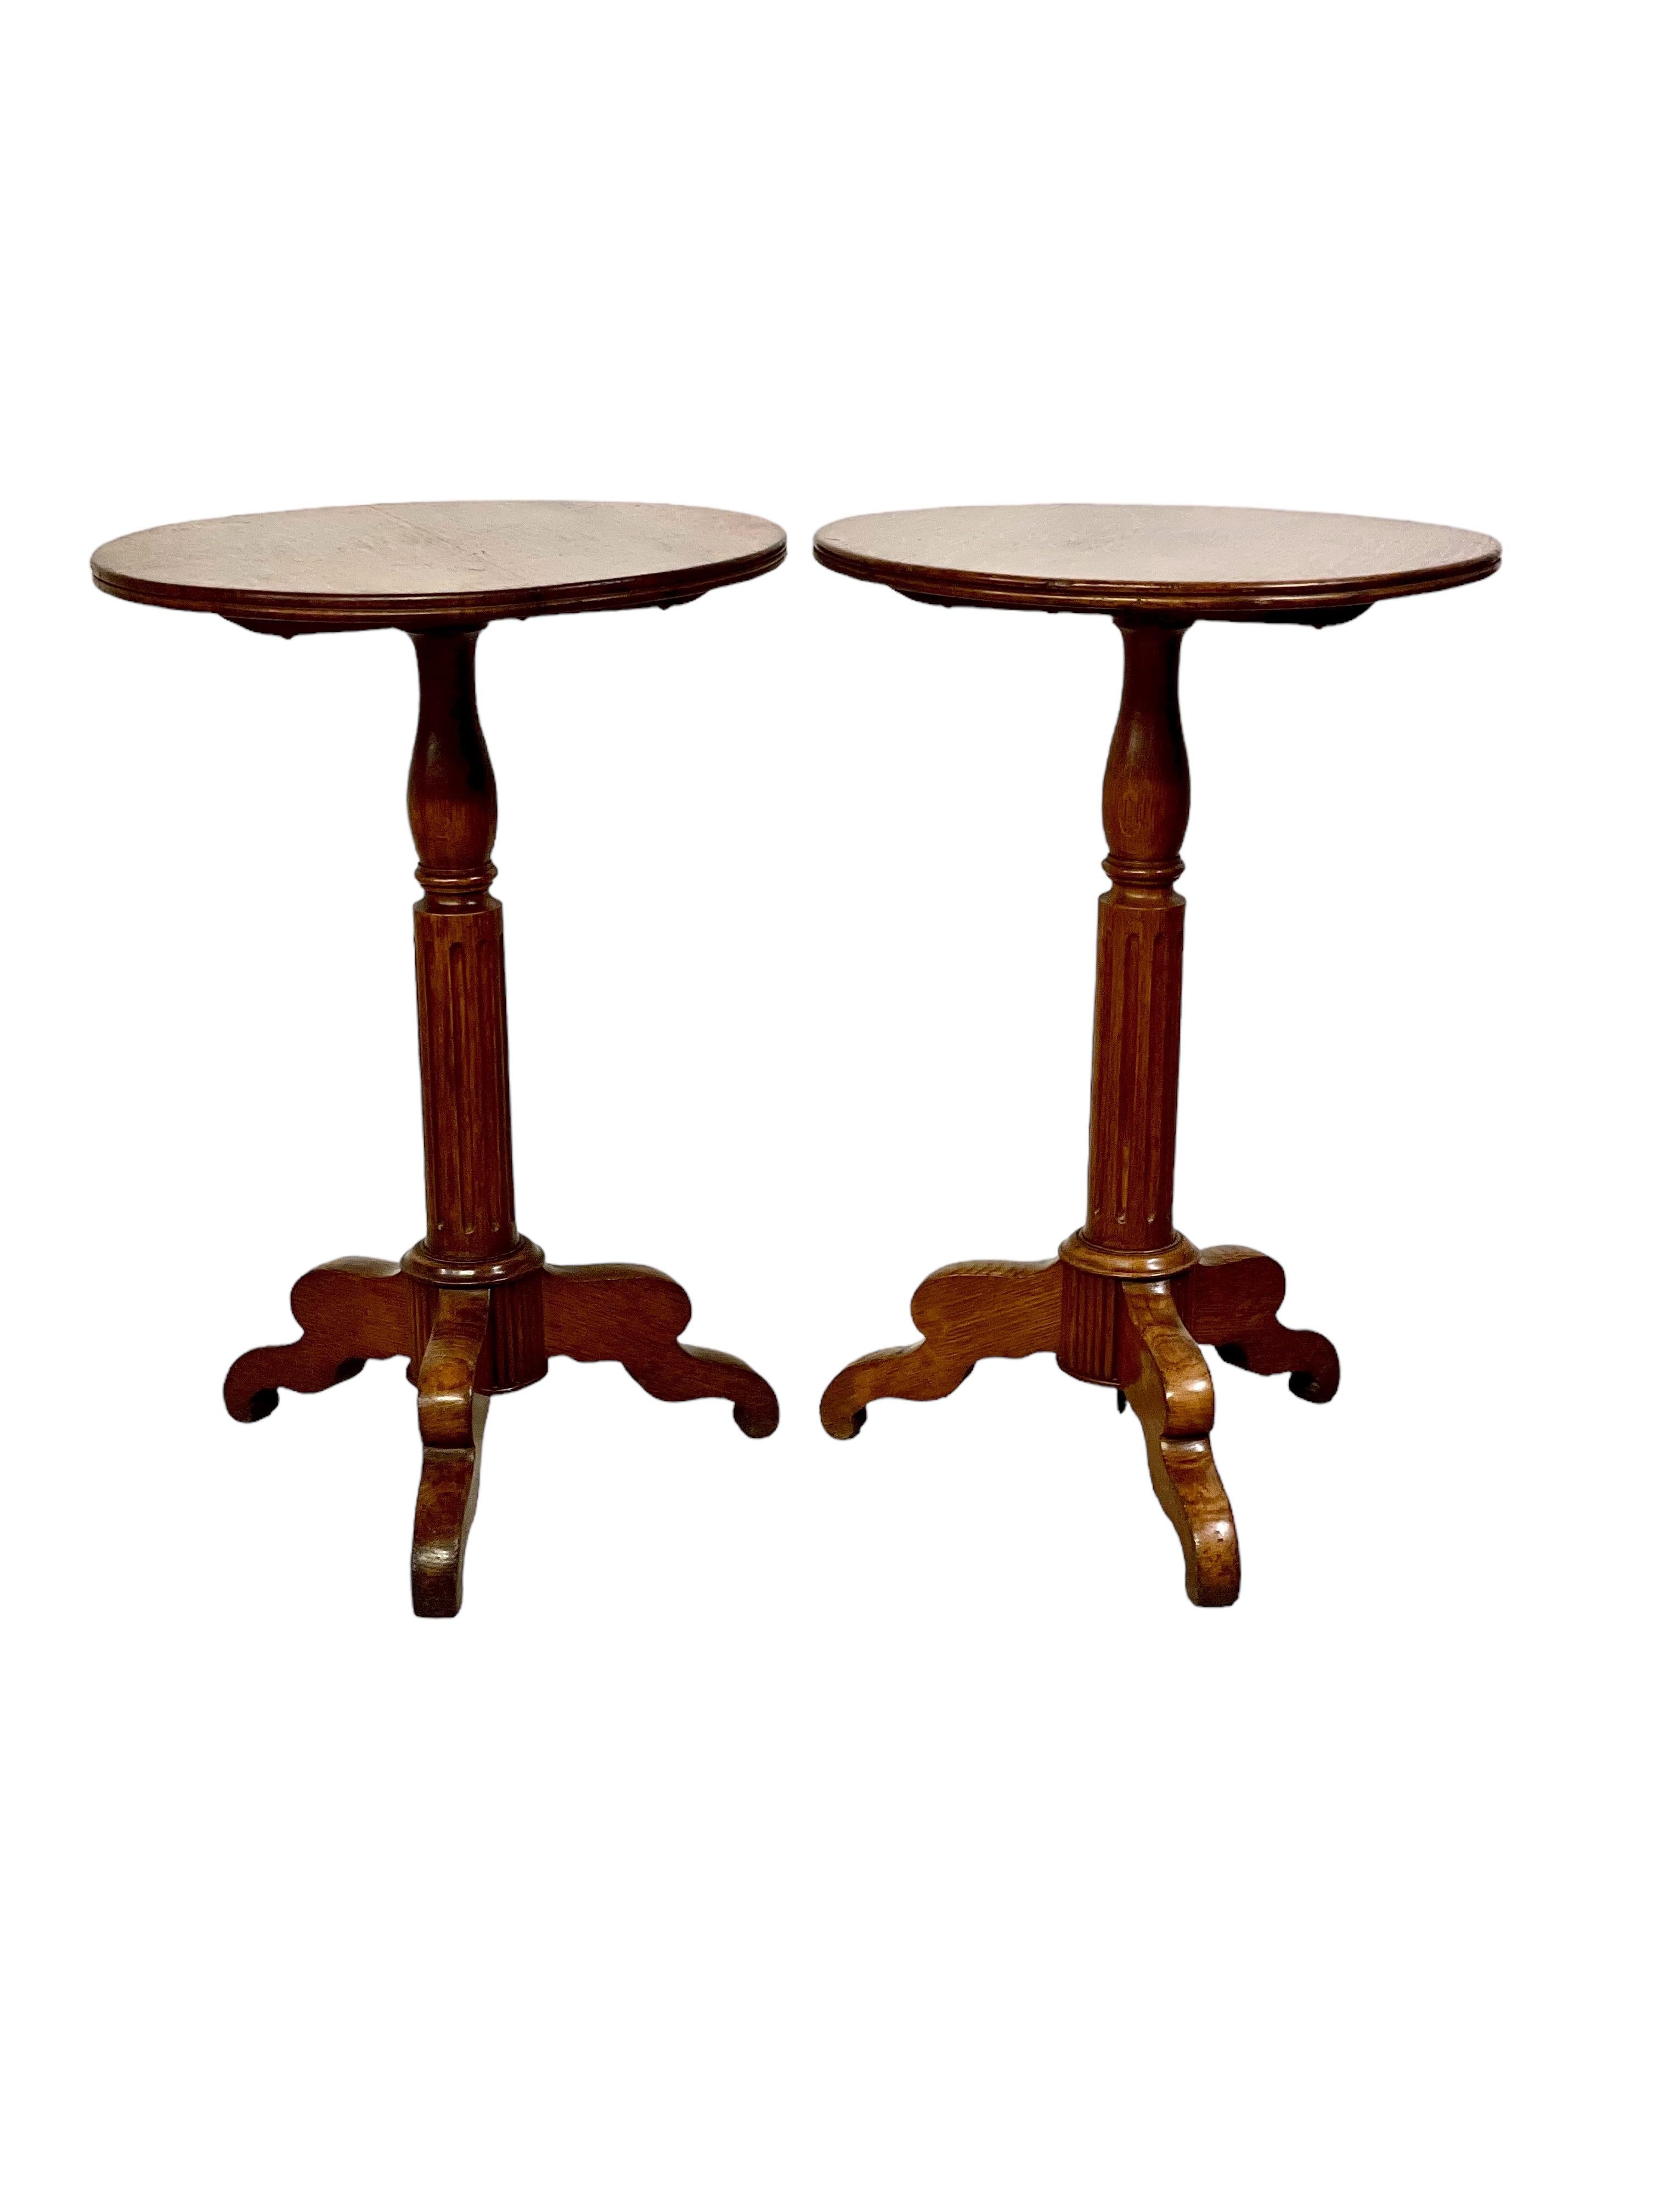  Pair of French Walnut Gueridon Tables, 19th Century For Sale 9